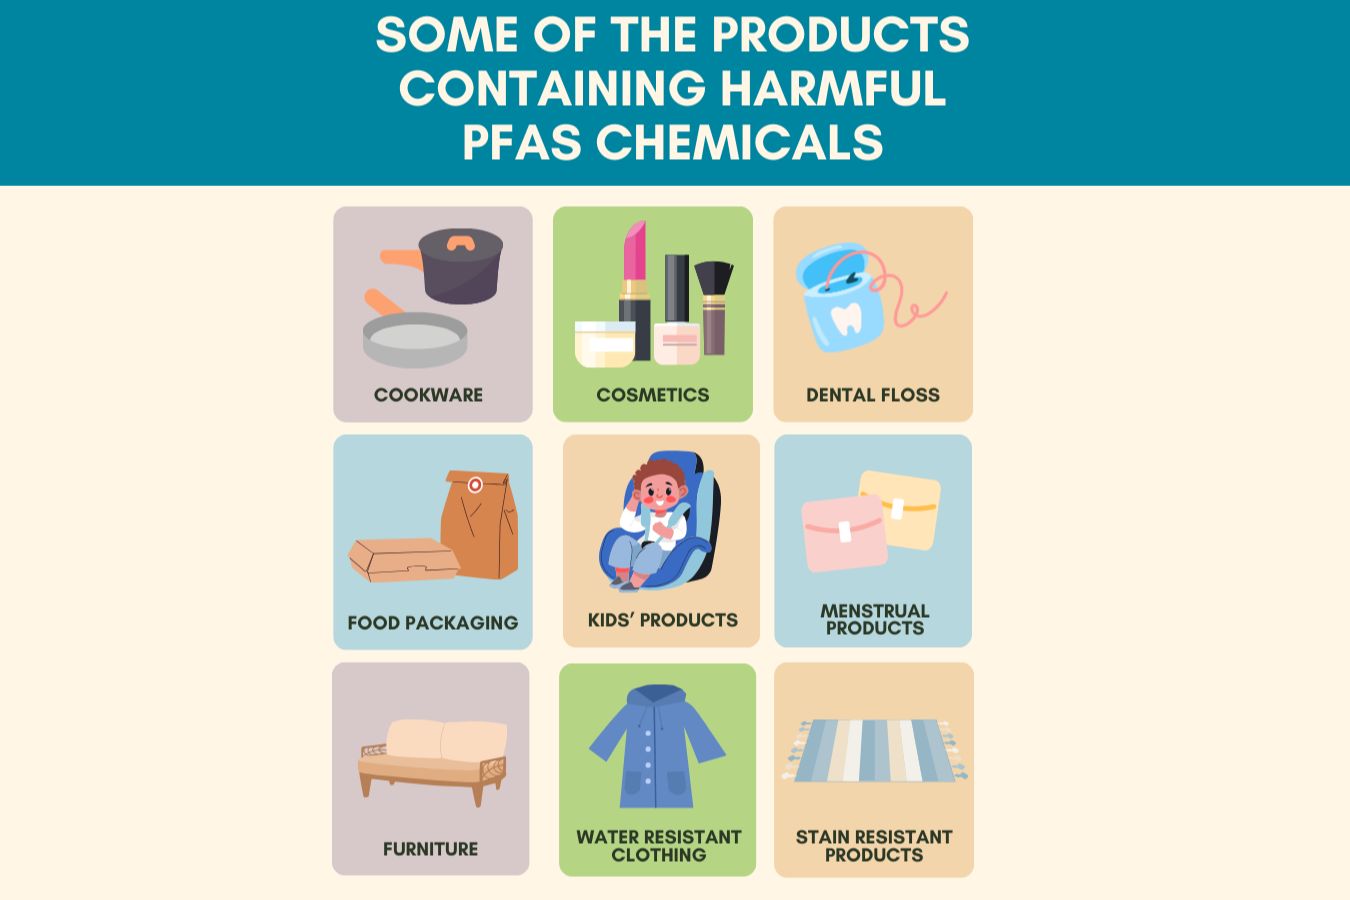 Graphic design that illustrates various products containing PFAS like cookware and stain resistant items